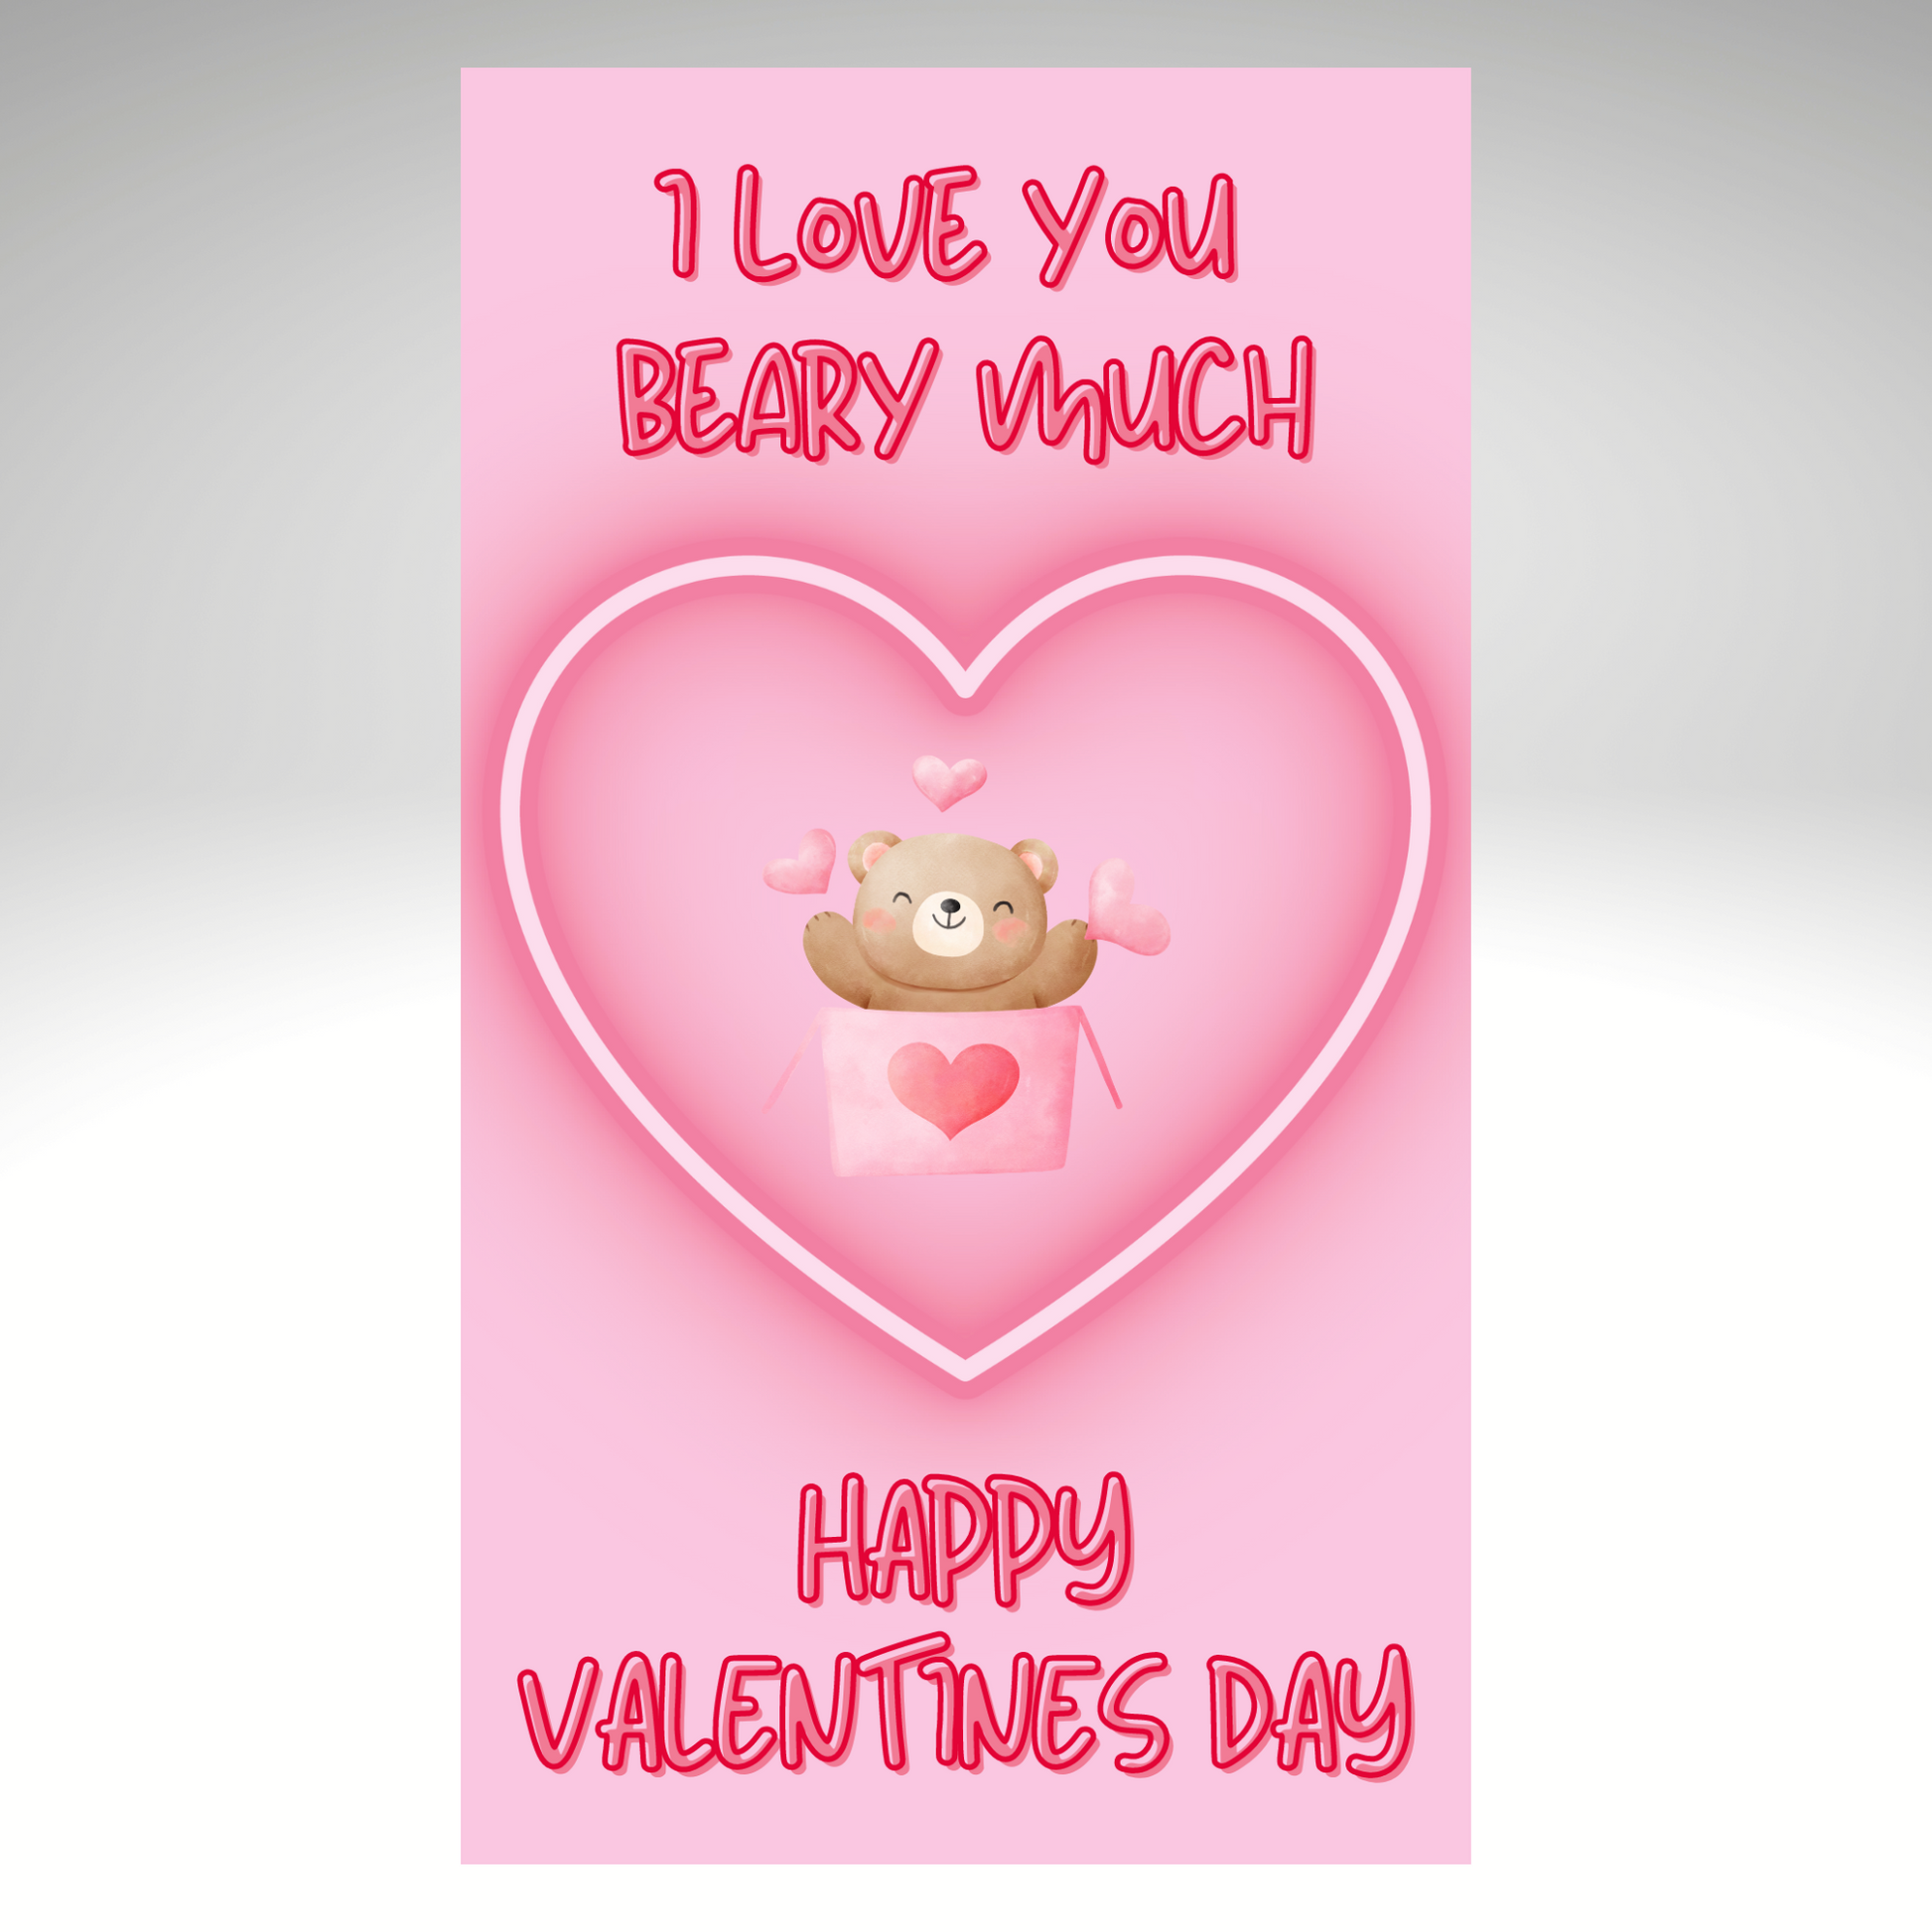 Valentines MP4 Video Message - I Love You Beary Much PNG